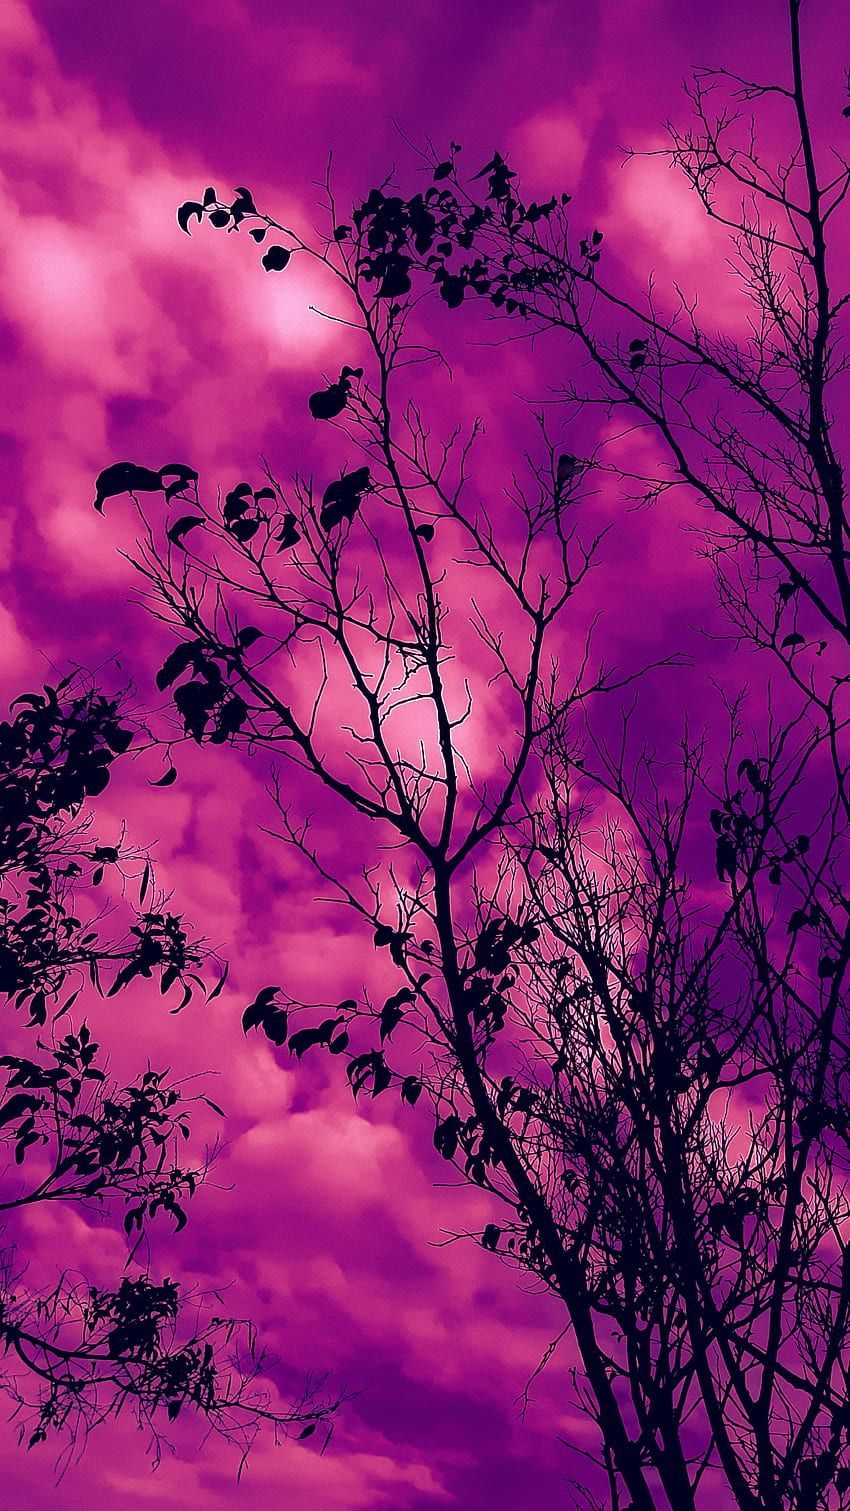 A tree silhouetted against a purple sky - Magenta